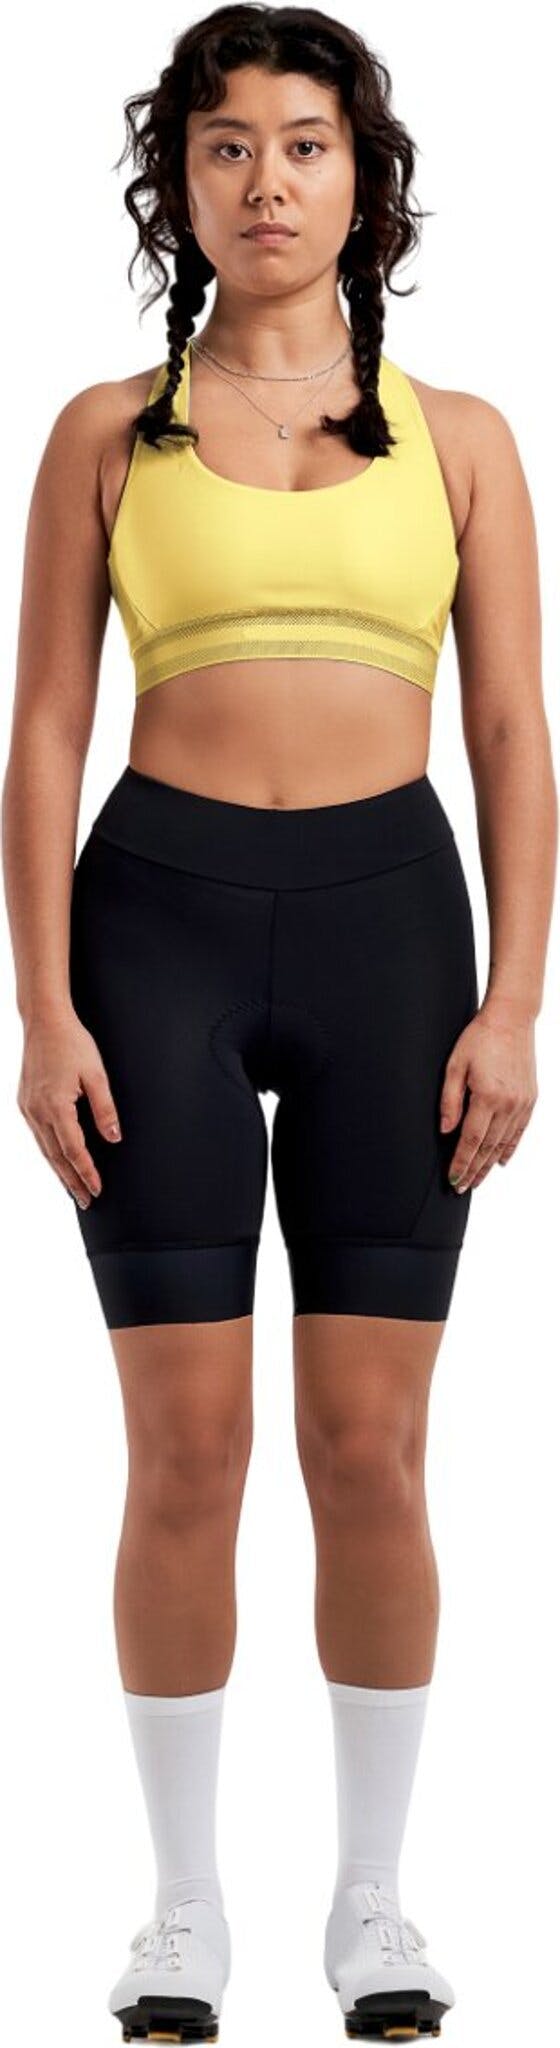 Product image for  P.Cycled Signature Sports Bra - Women's